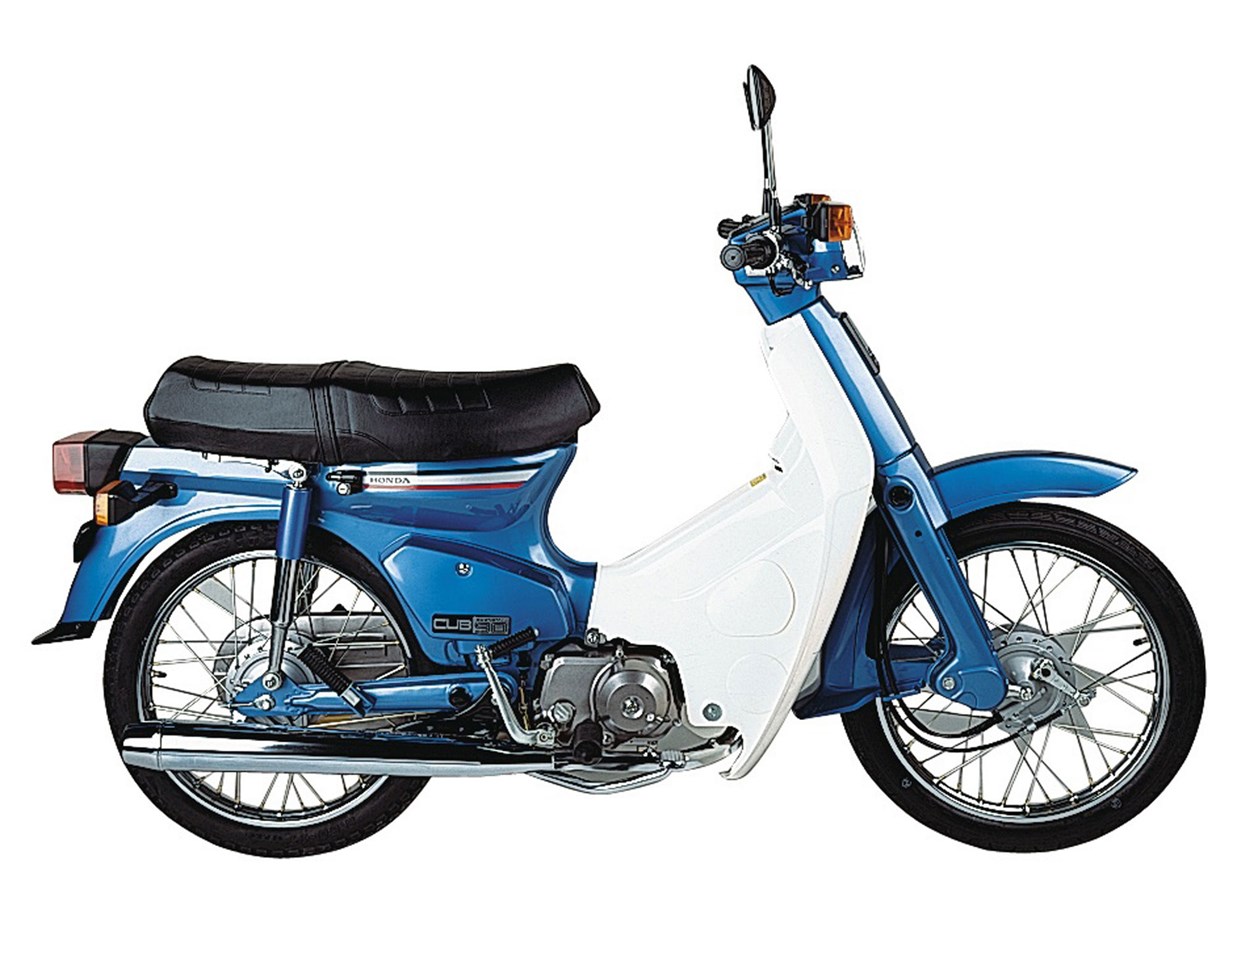 Honda C90 (1967-2002) review and used buying guide | MCN